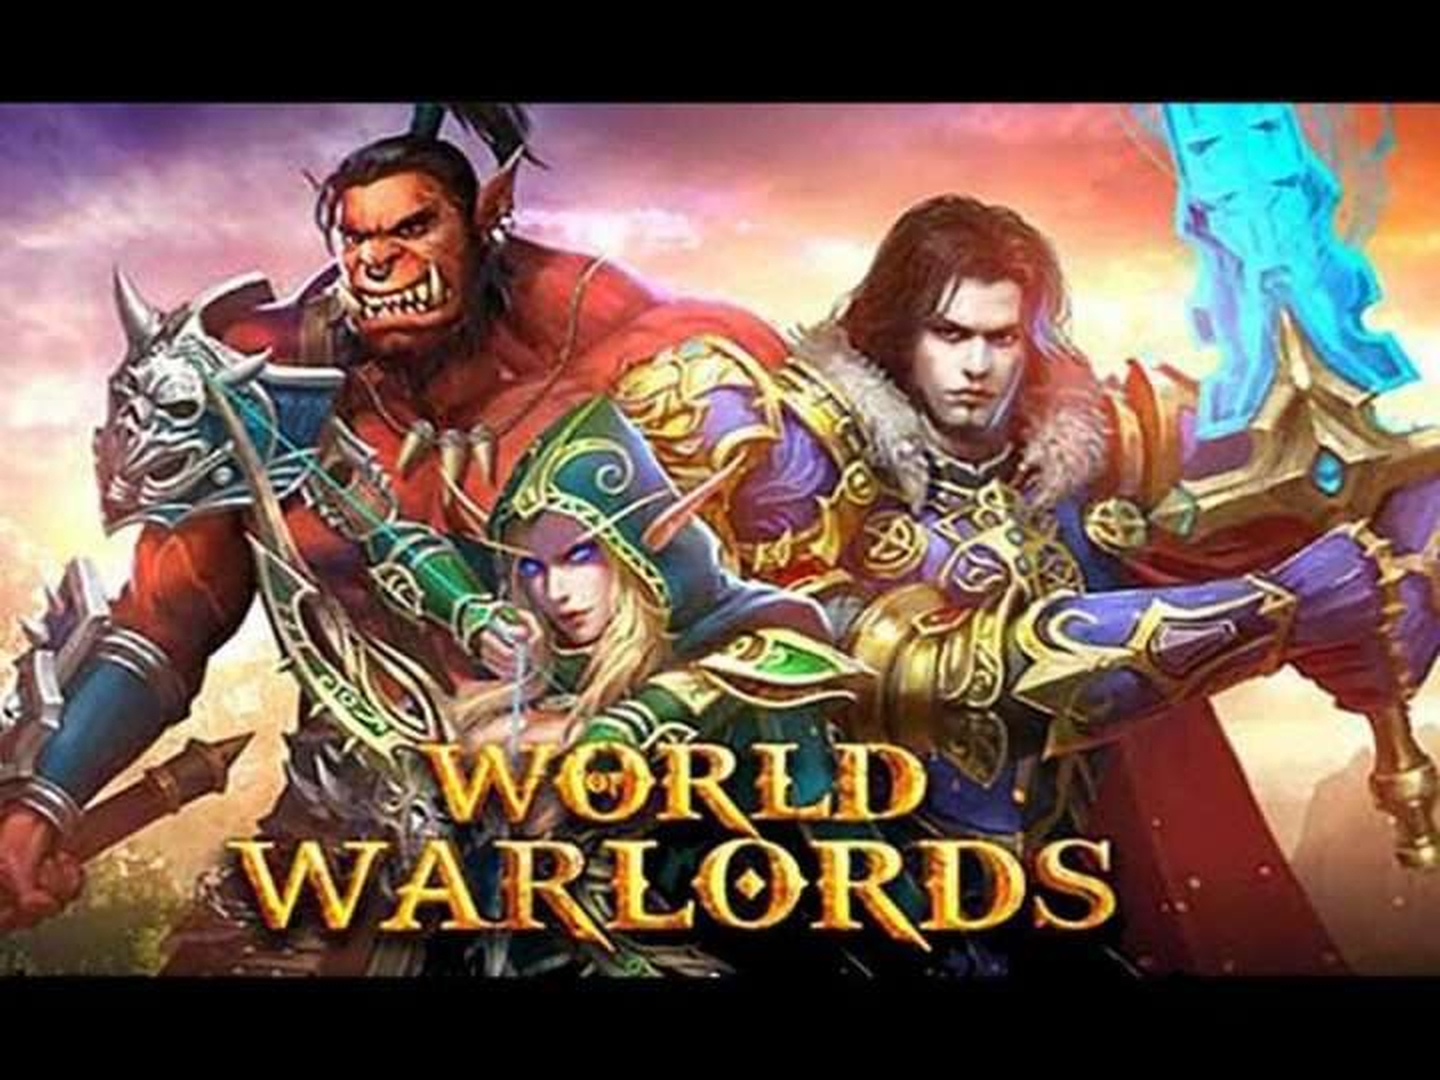 World of Warlords demo